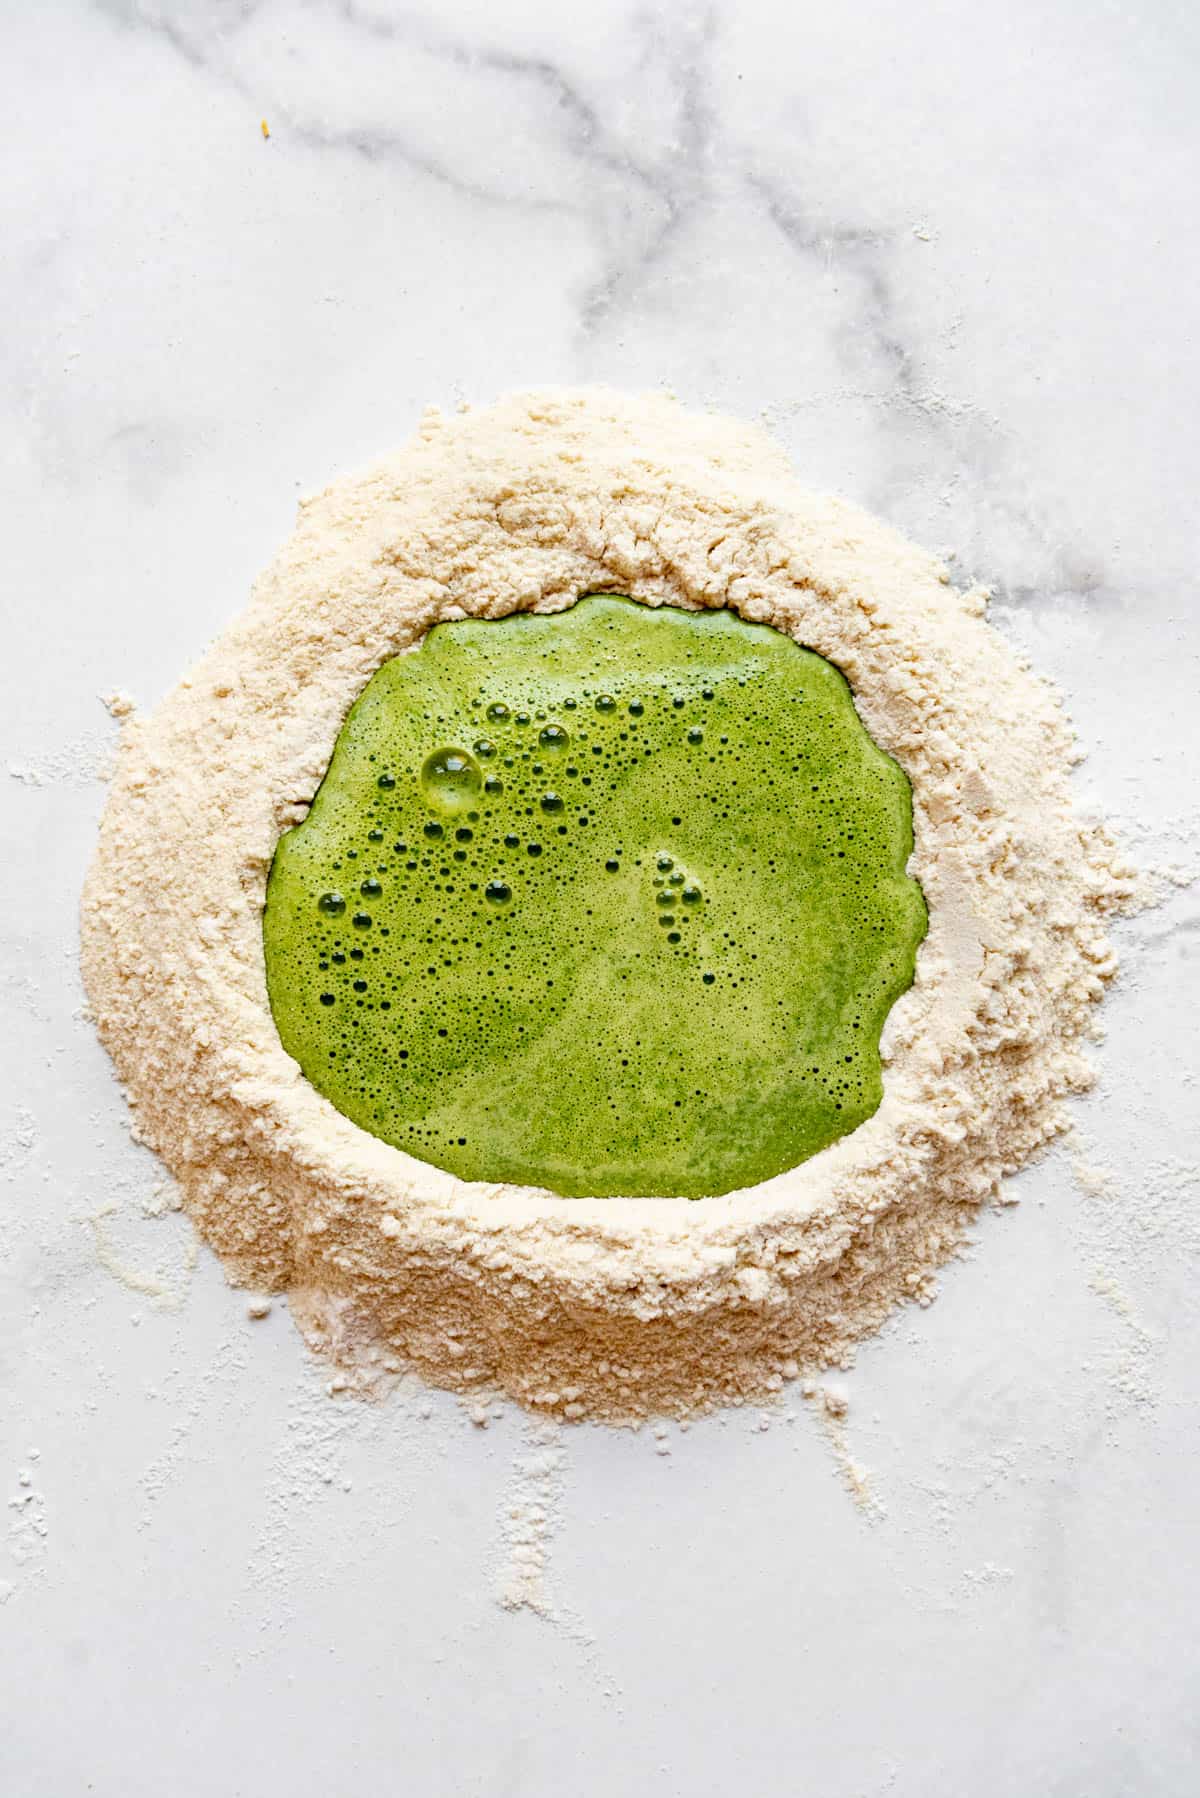 Adding blended spinach and eggs to a well of flour for making pasta dough.